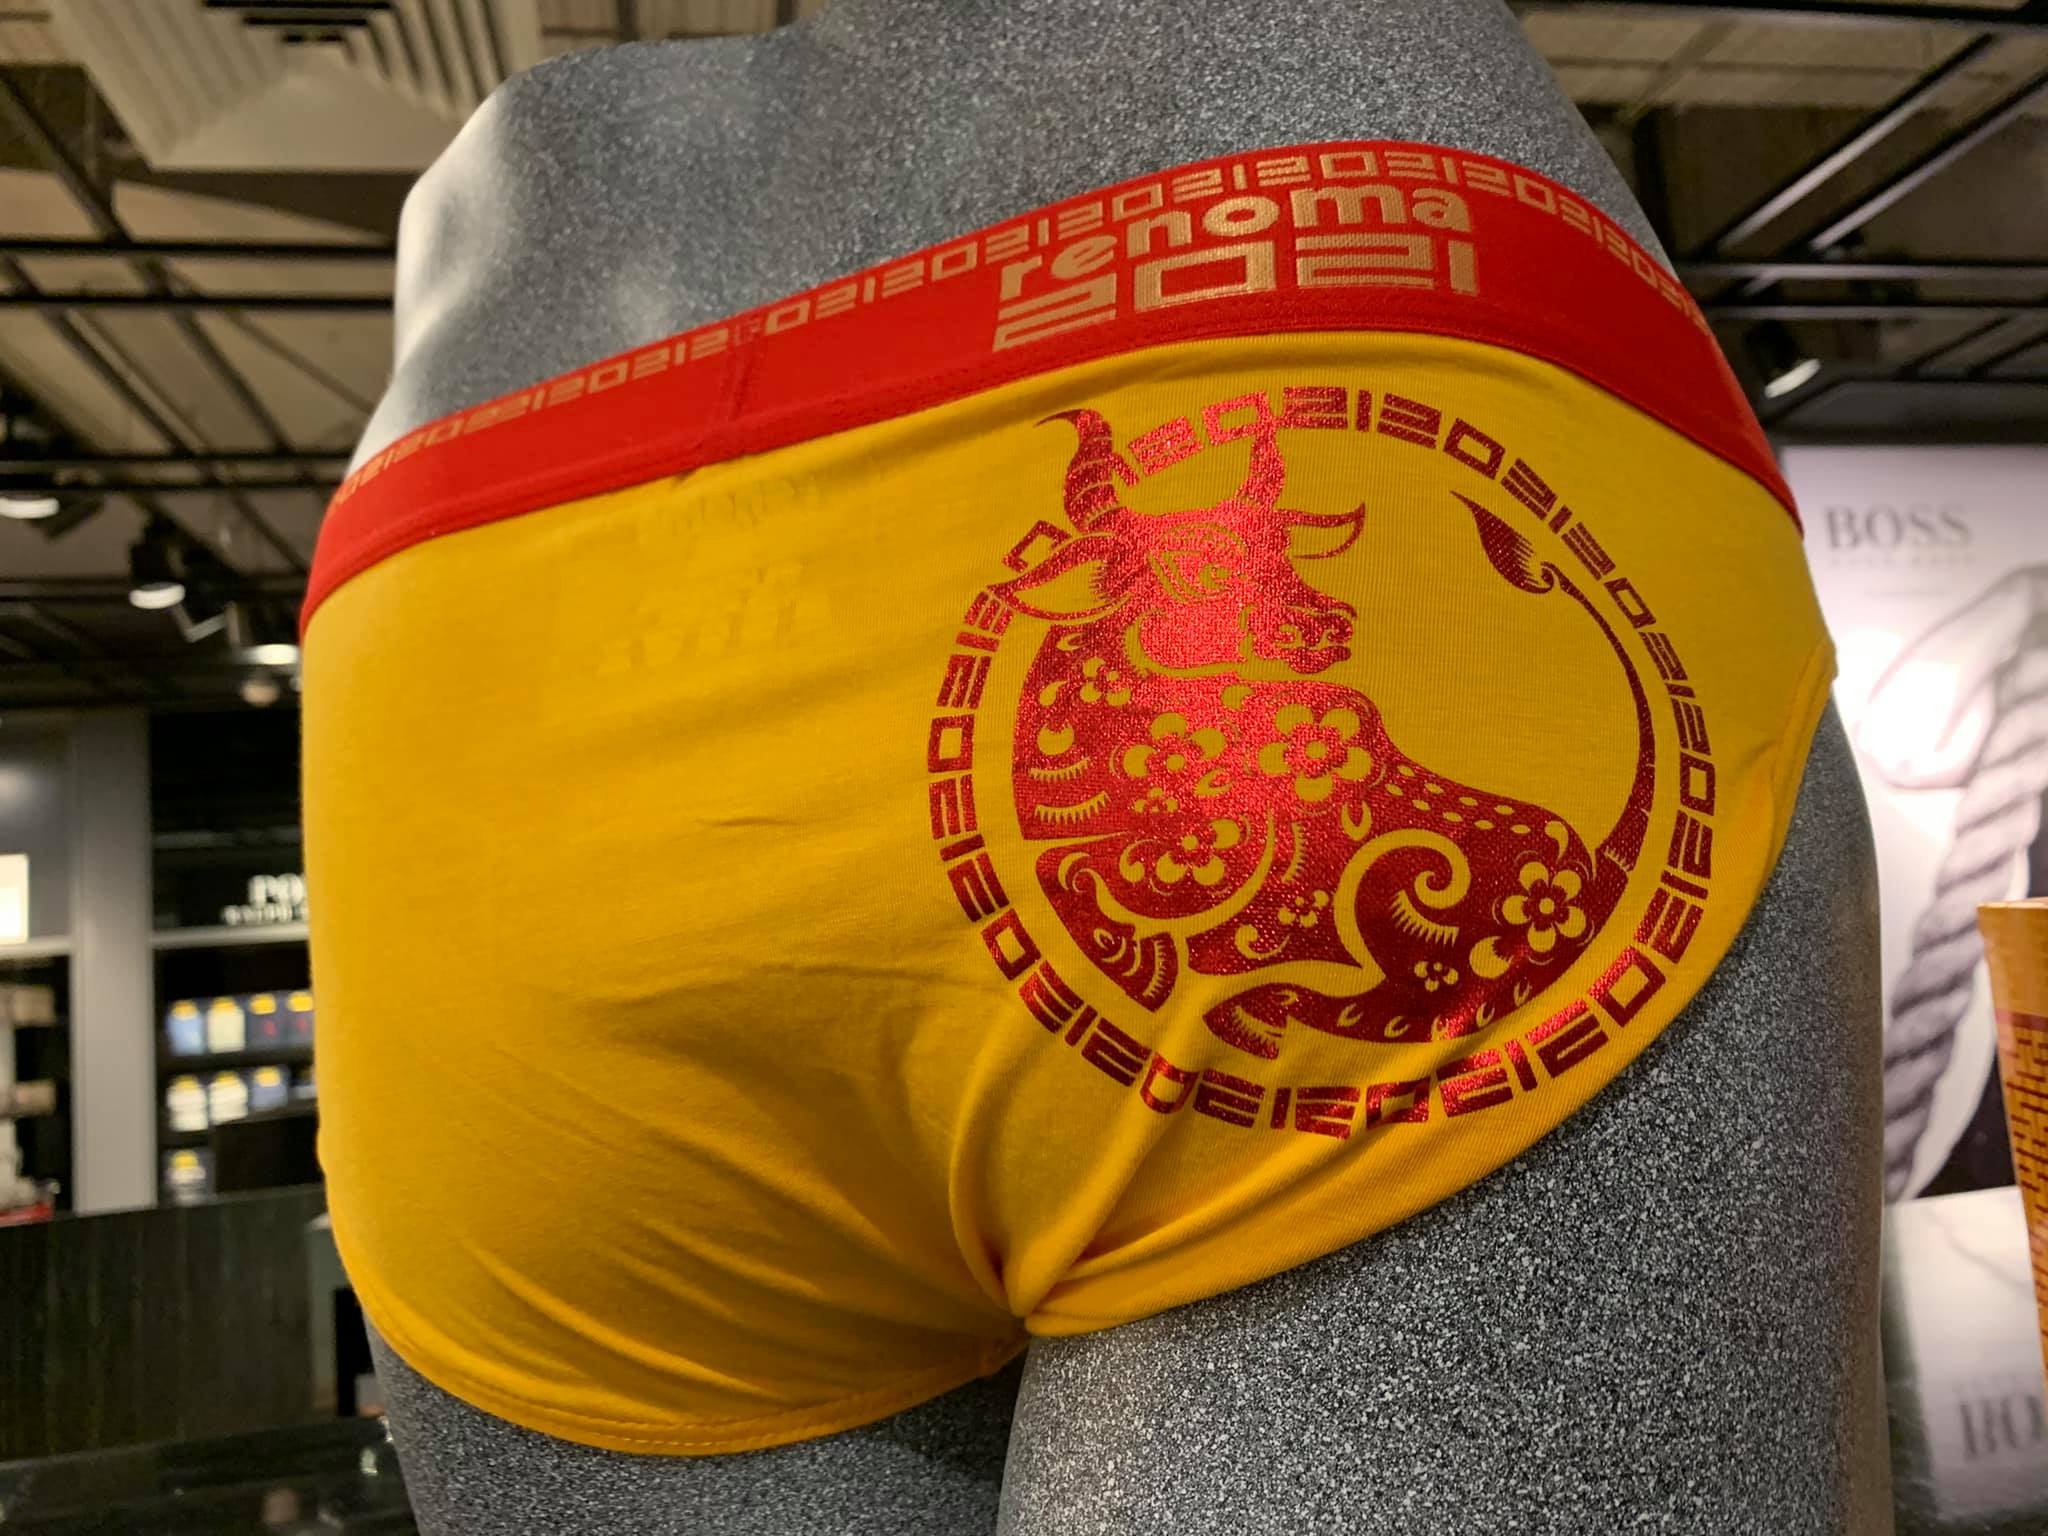 Renoma Underwear Will Give All The Huat You Need During Ban Luck